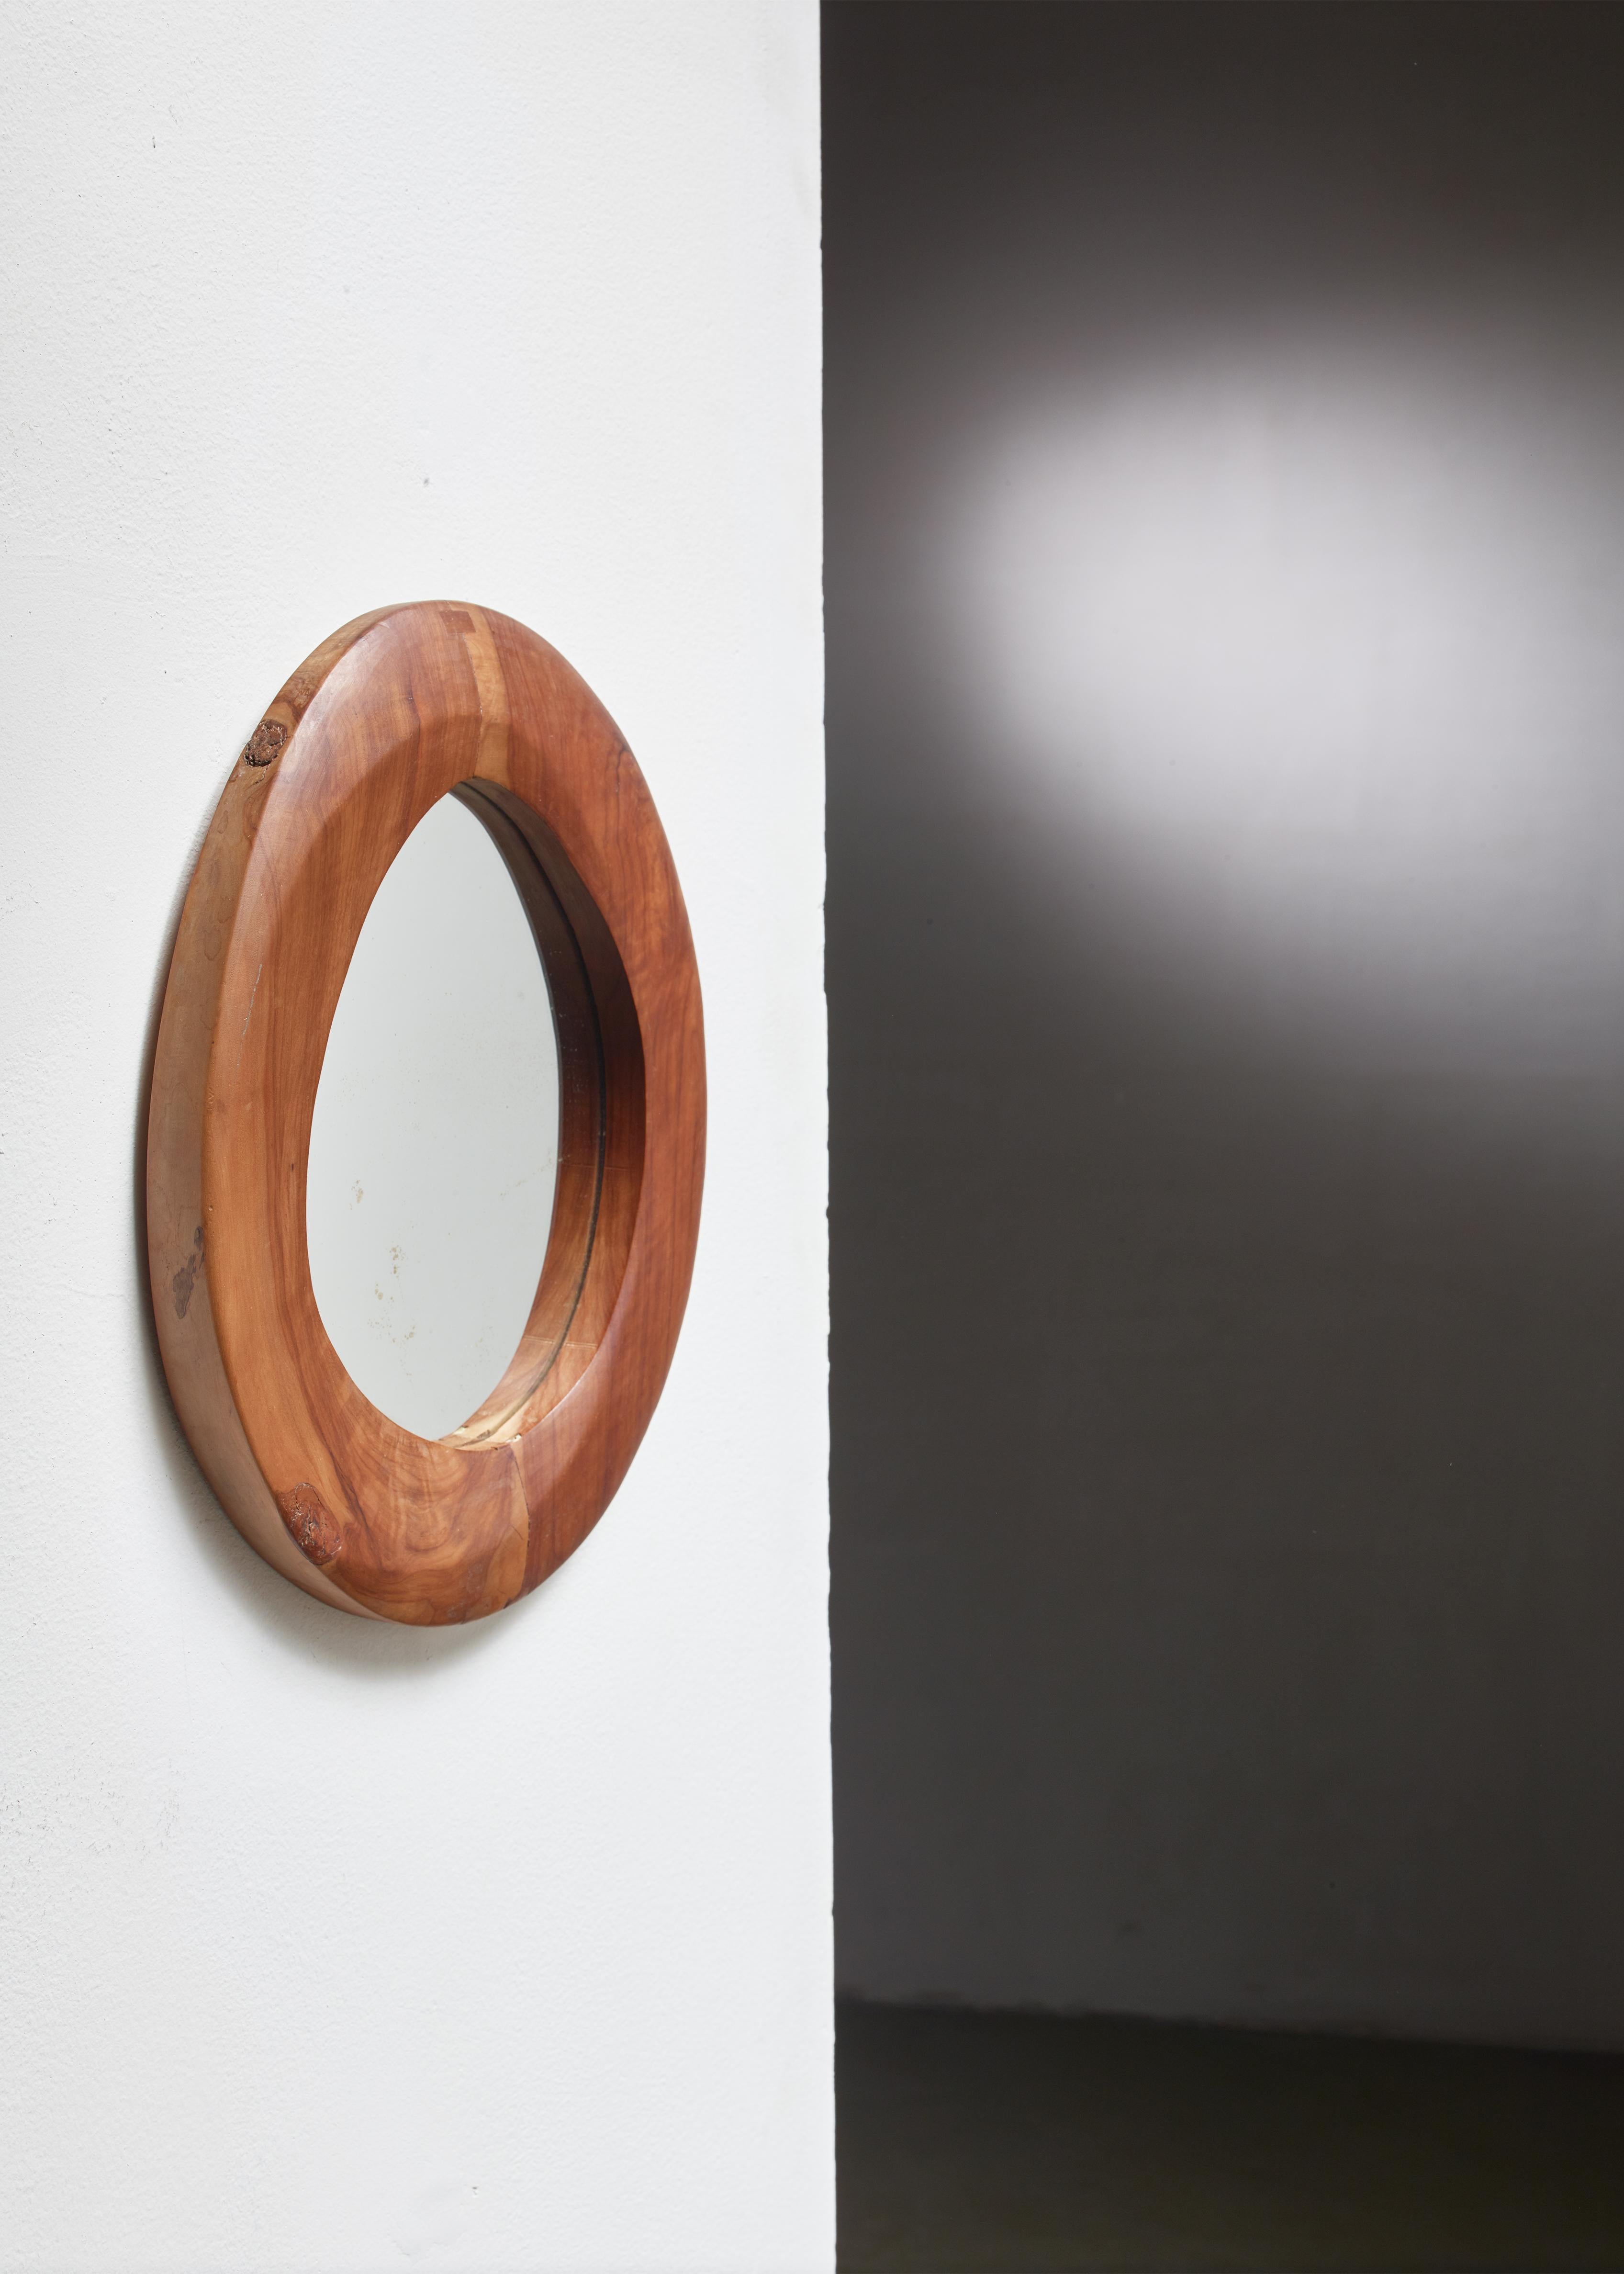 A free-form wood mirror from France. The oval frame shows the skill and style of French woodworkers like Alexandre Noll.
 